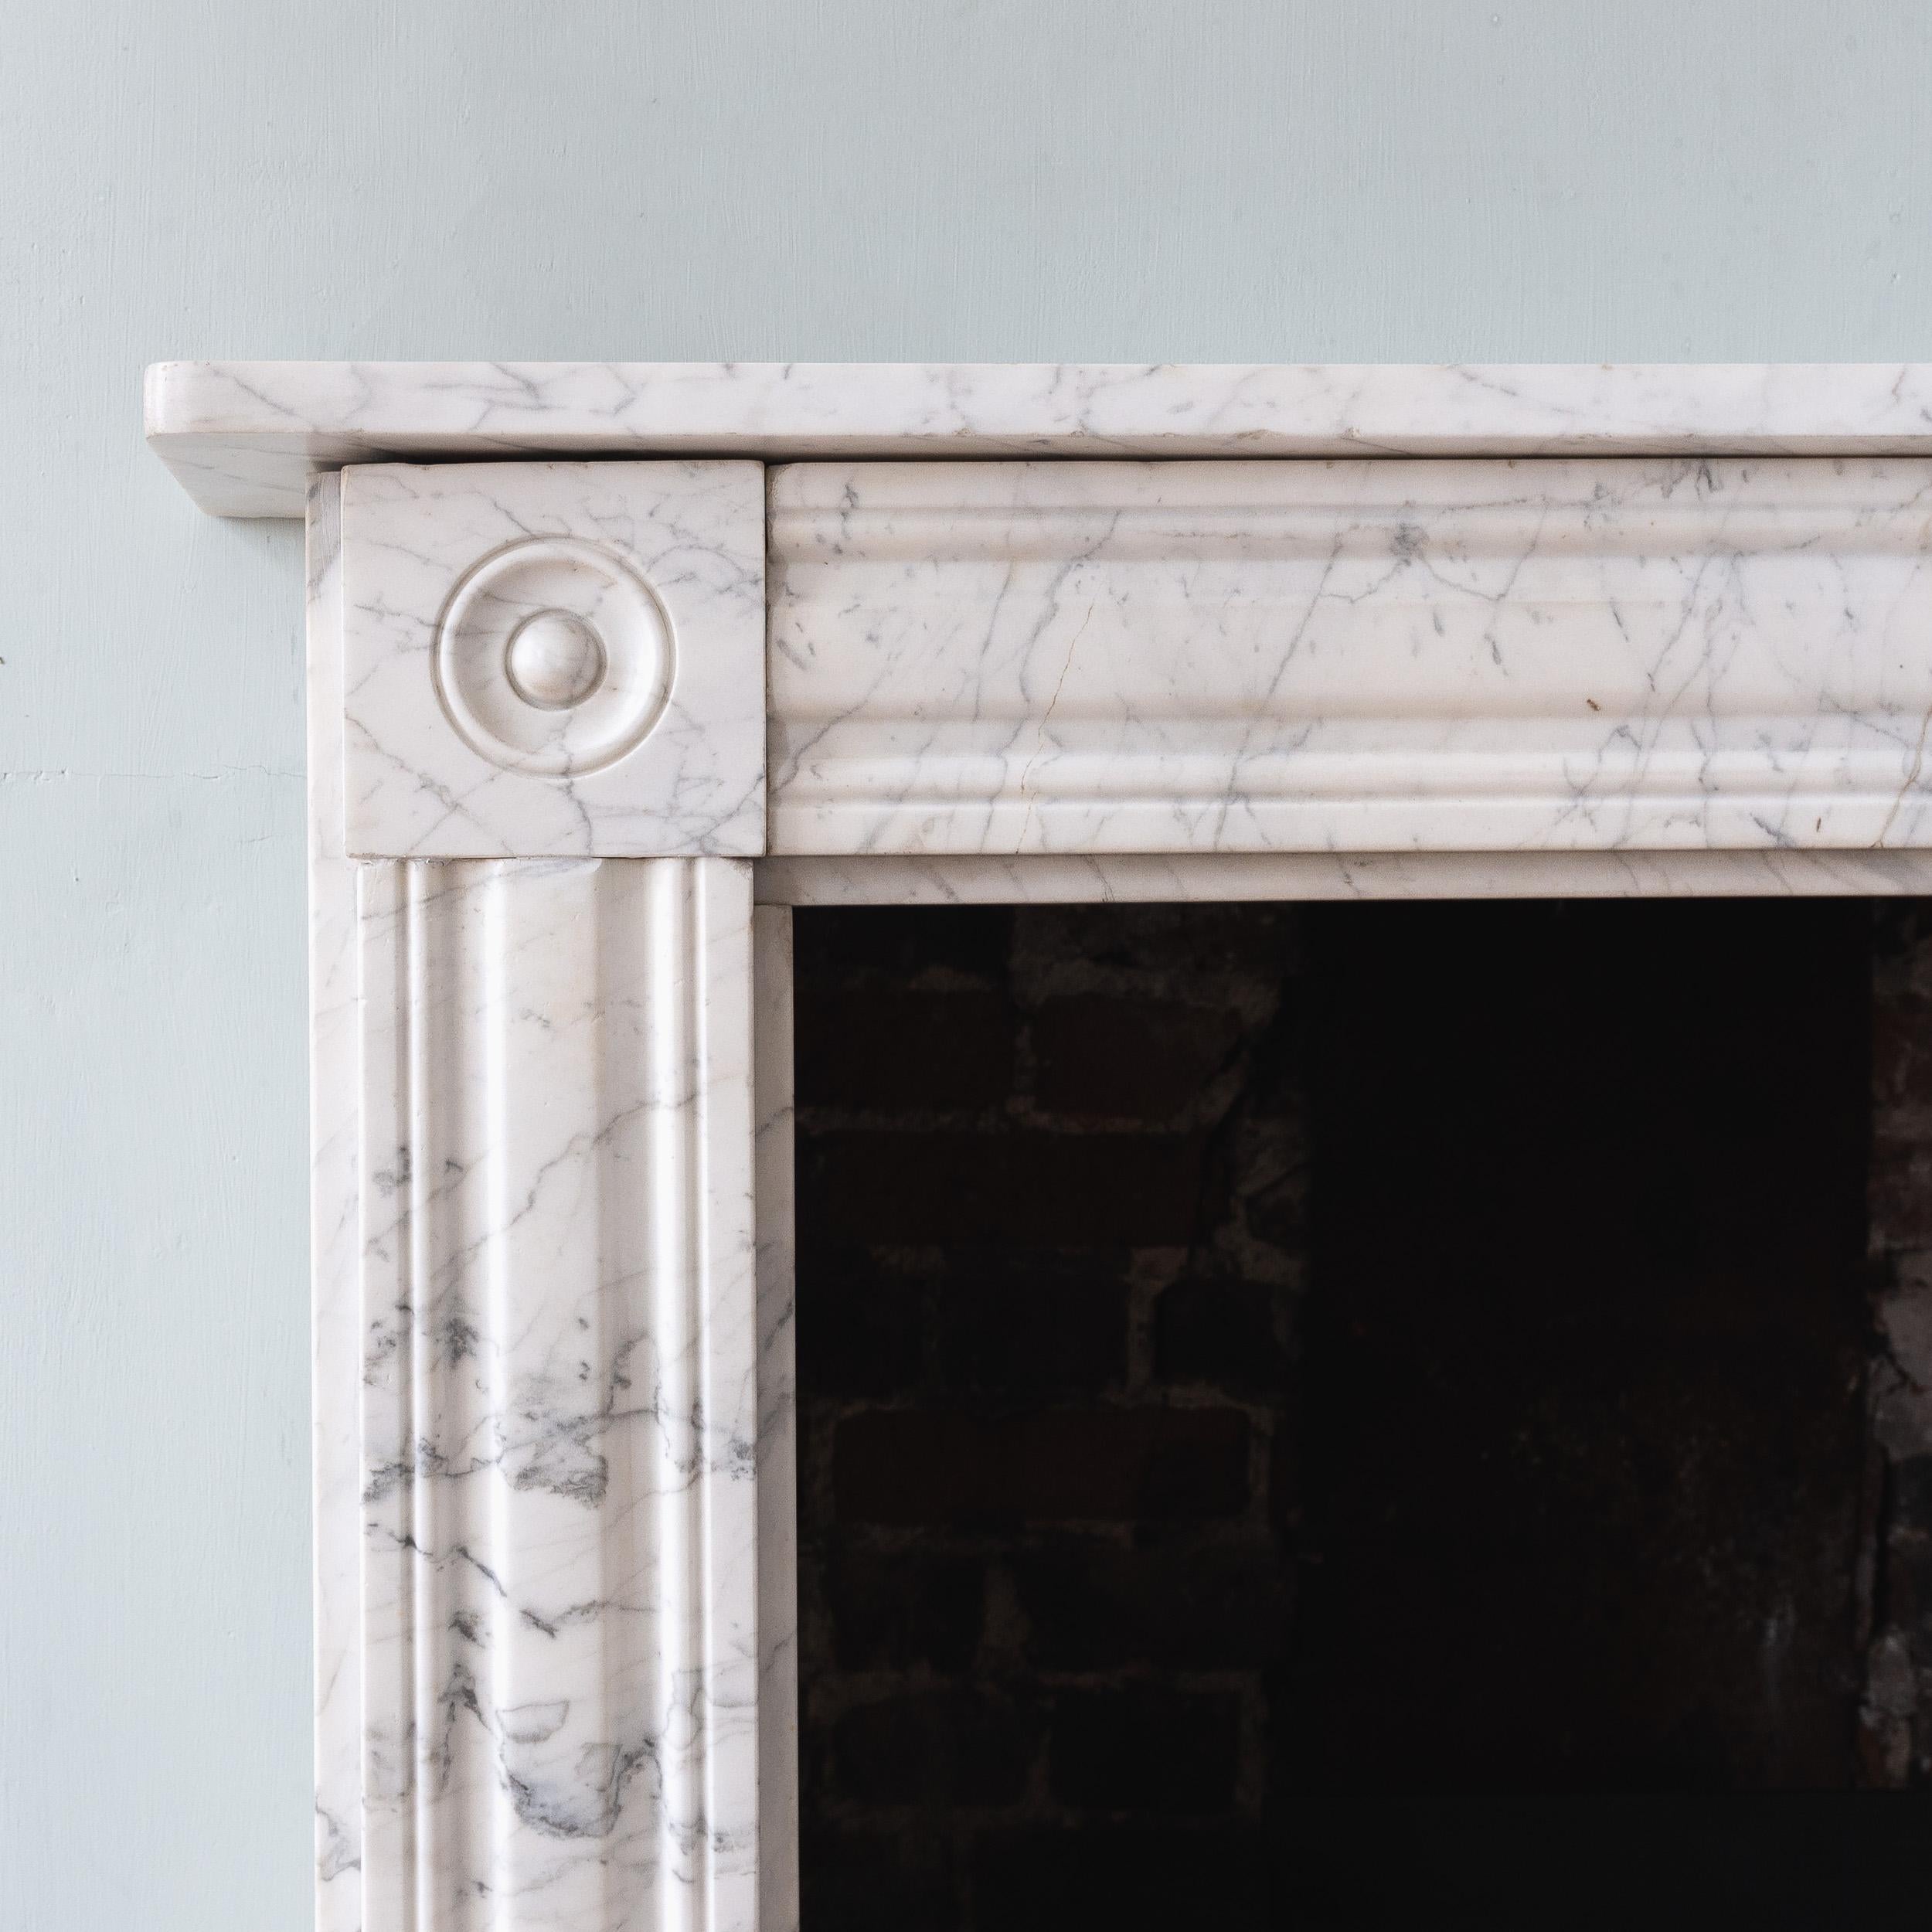 An English Regency period Carrara mrable bullseye fireplace circa 1820, with moulded frieze and jambs.

Opening width 93.5 cm x 90 cm high, Outside jamb to jamb 127.5 cm wide.

Ready for installation and use.